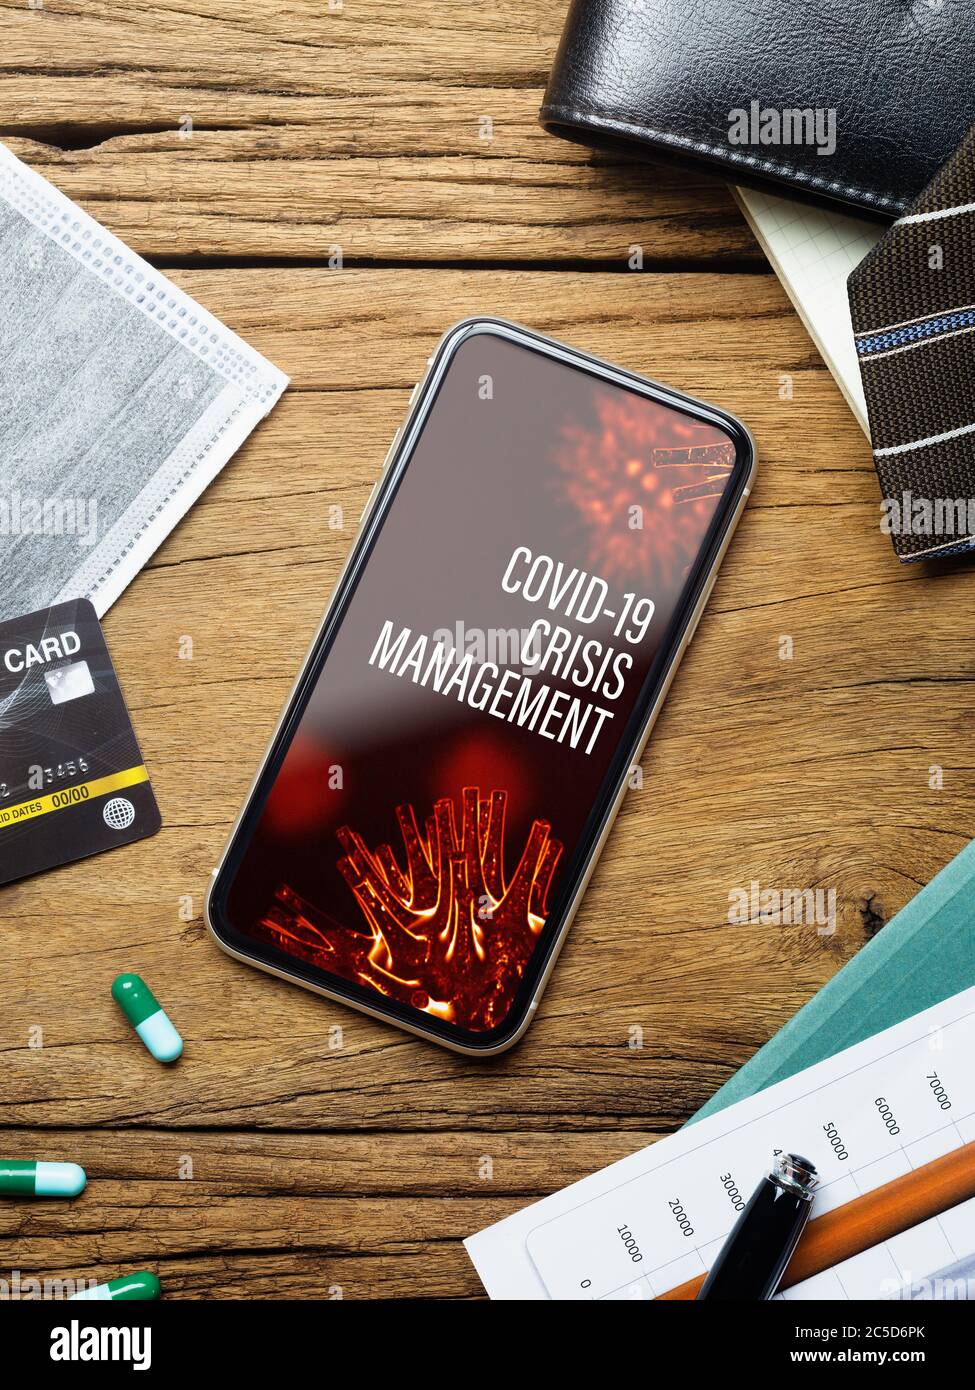 Coronavirus Covid-19 pandemic outbreak Crisis Management background concept. Mockup mobile phone on grunge wood with  business charts, facemask on wor Stock Photo